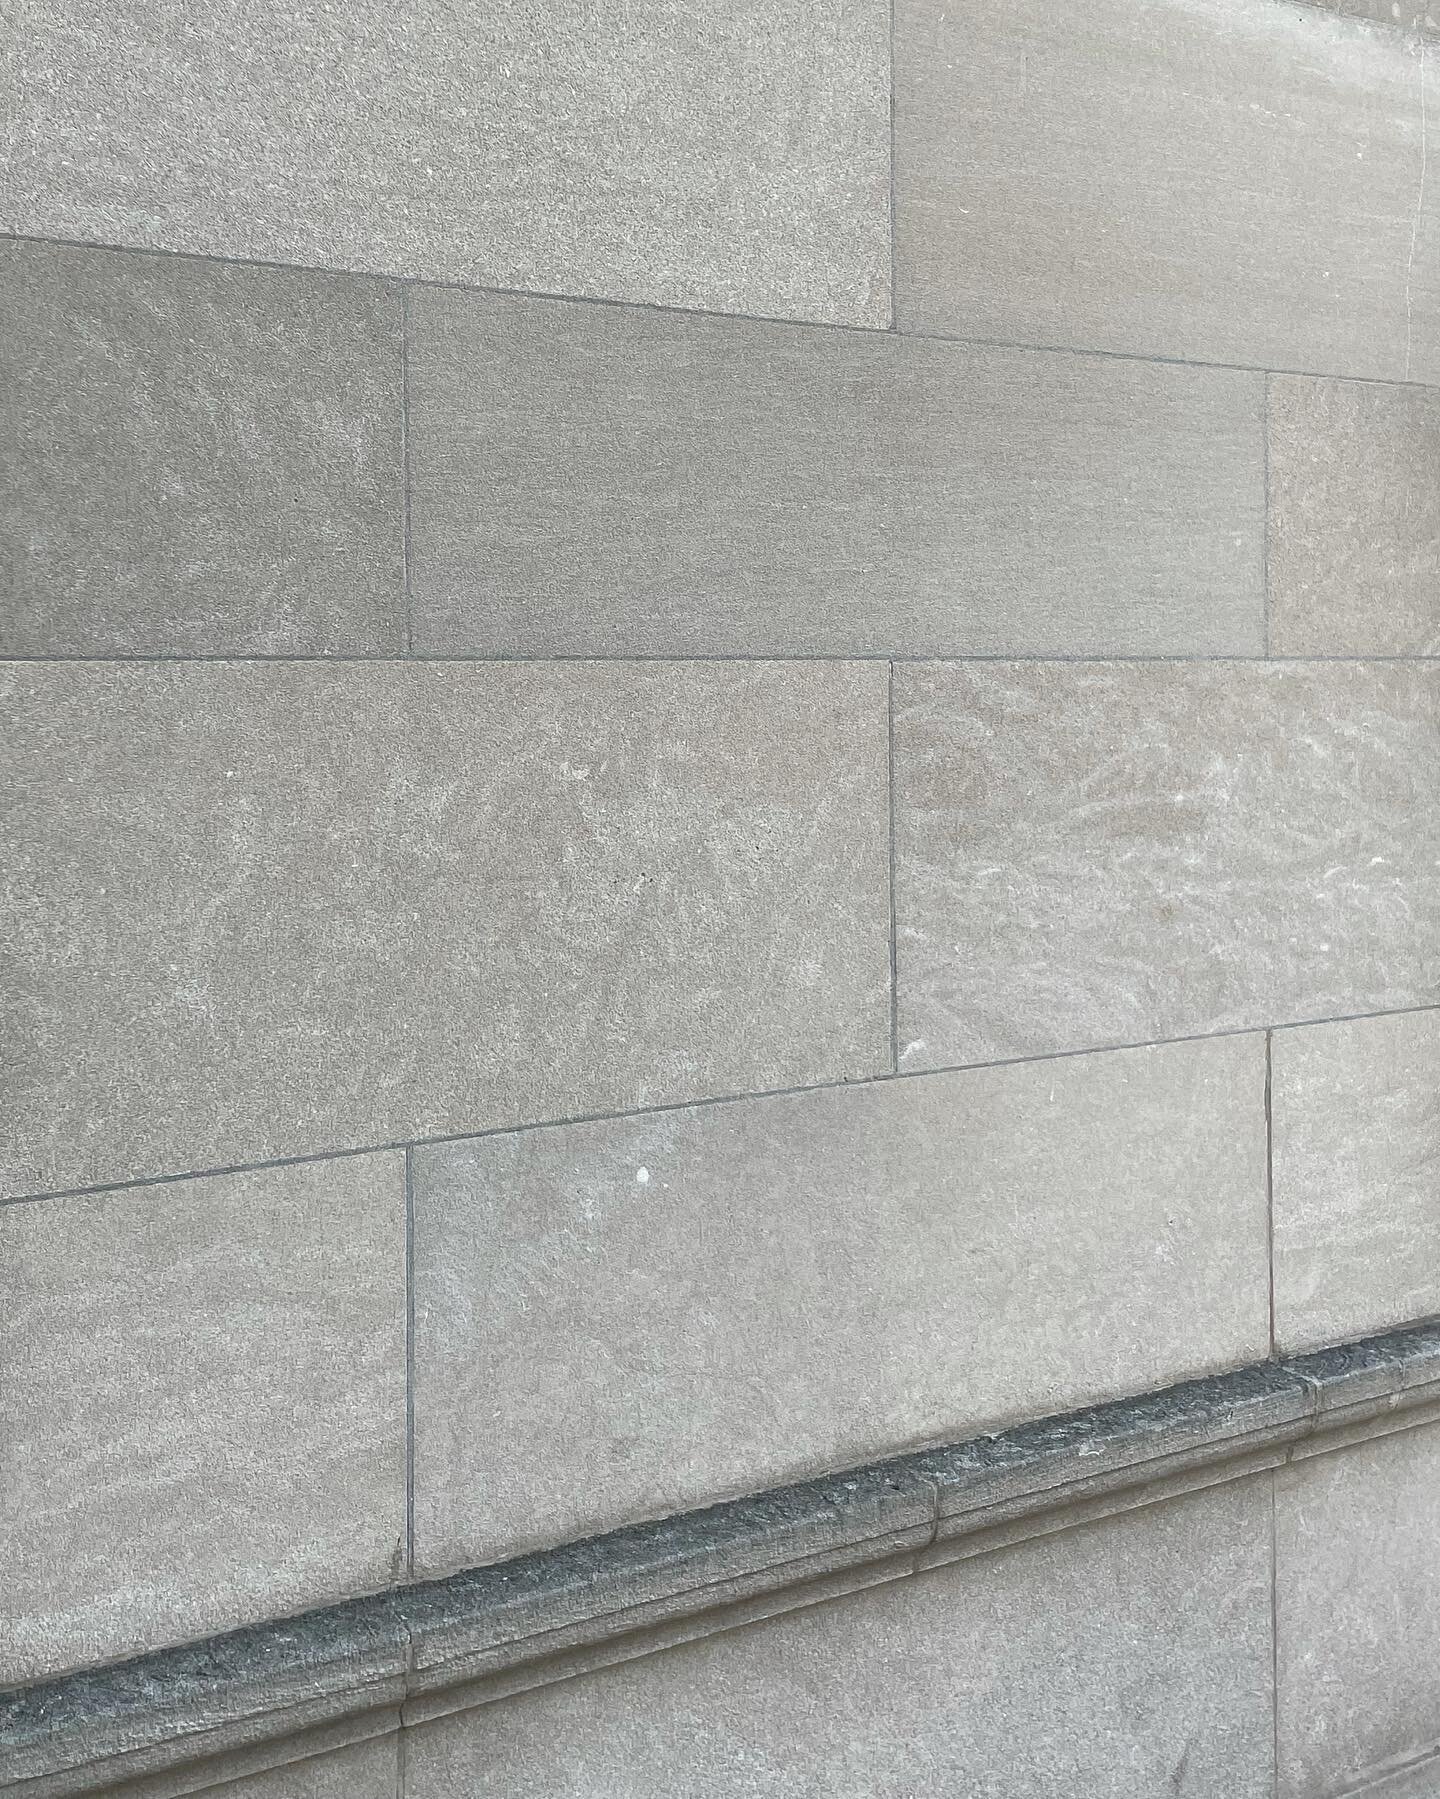 Limestone Lover 

.
.
.
.

#architecture #texture #materiality #neutrals #pattern #design #grid #facade #building #construction #clean #simplistic #classic #refined #elegant #photography #perspective #interiors #inspiration #interiordesign #decorate 